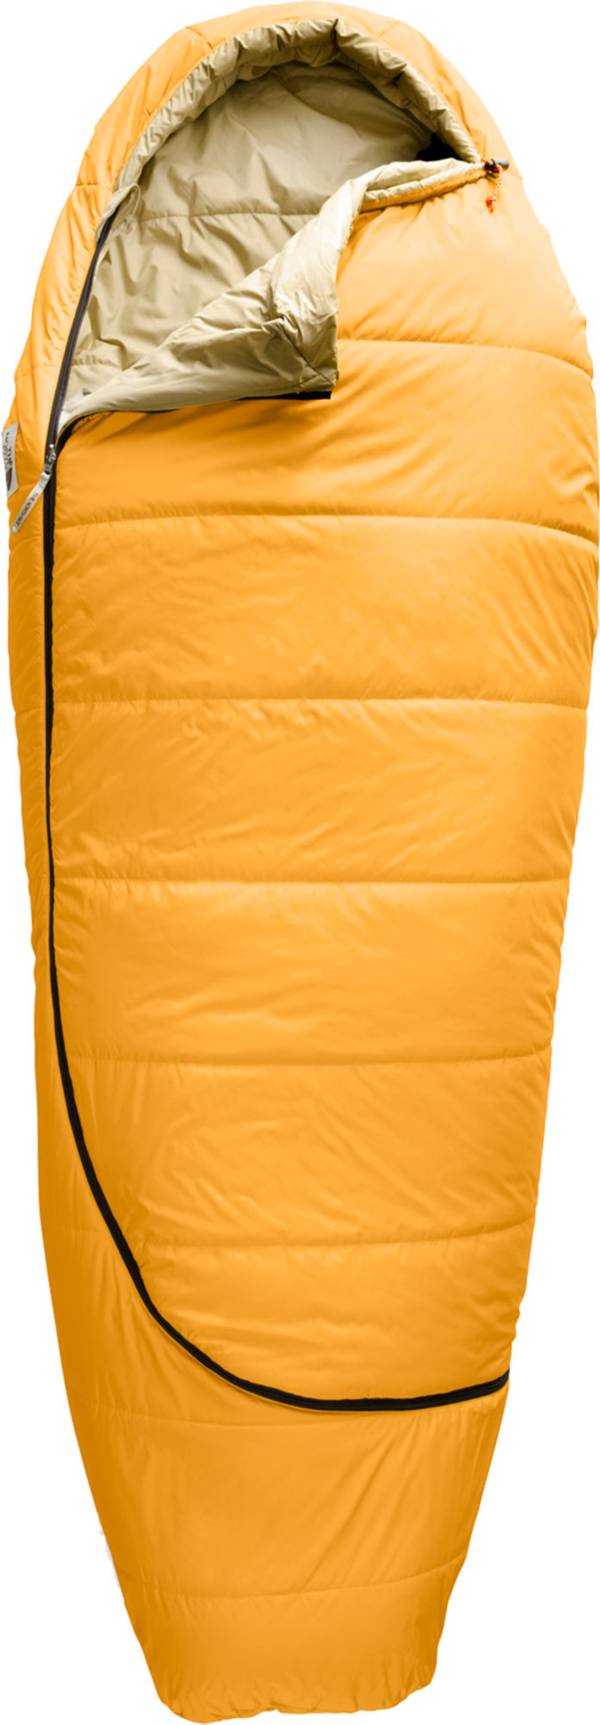 The North Face Eco Trail Synth - 35 Sleeping Bag product image